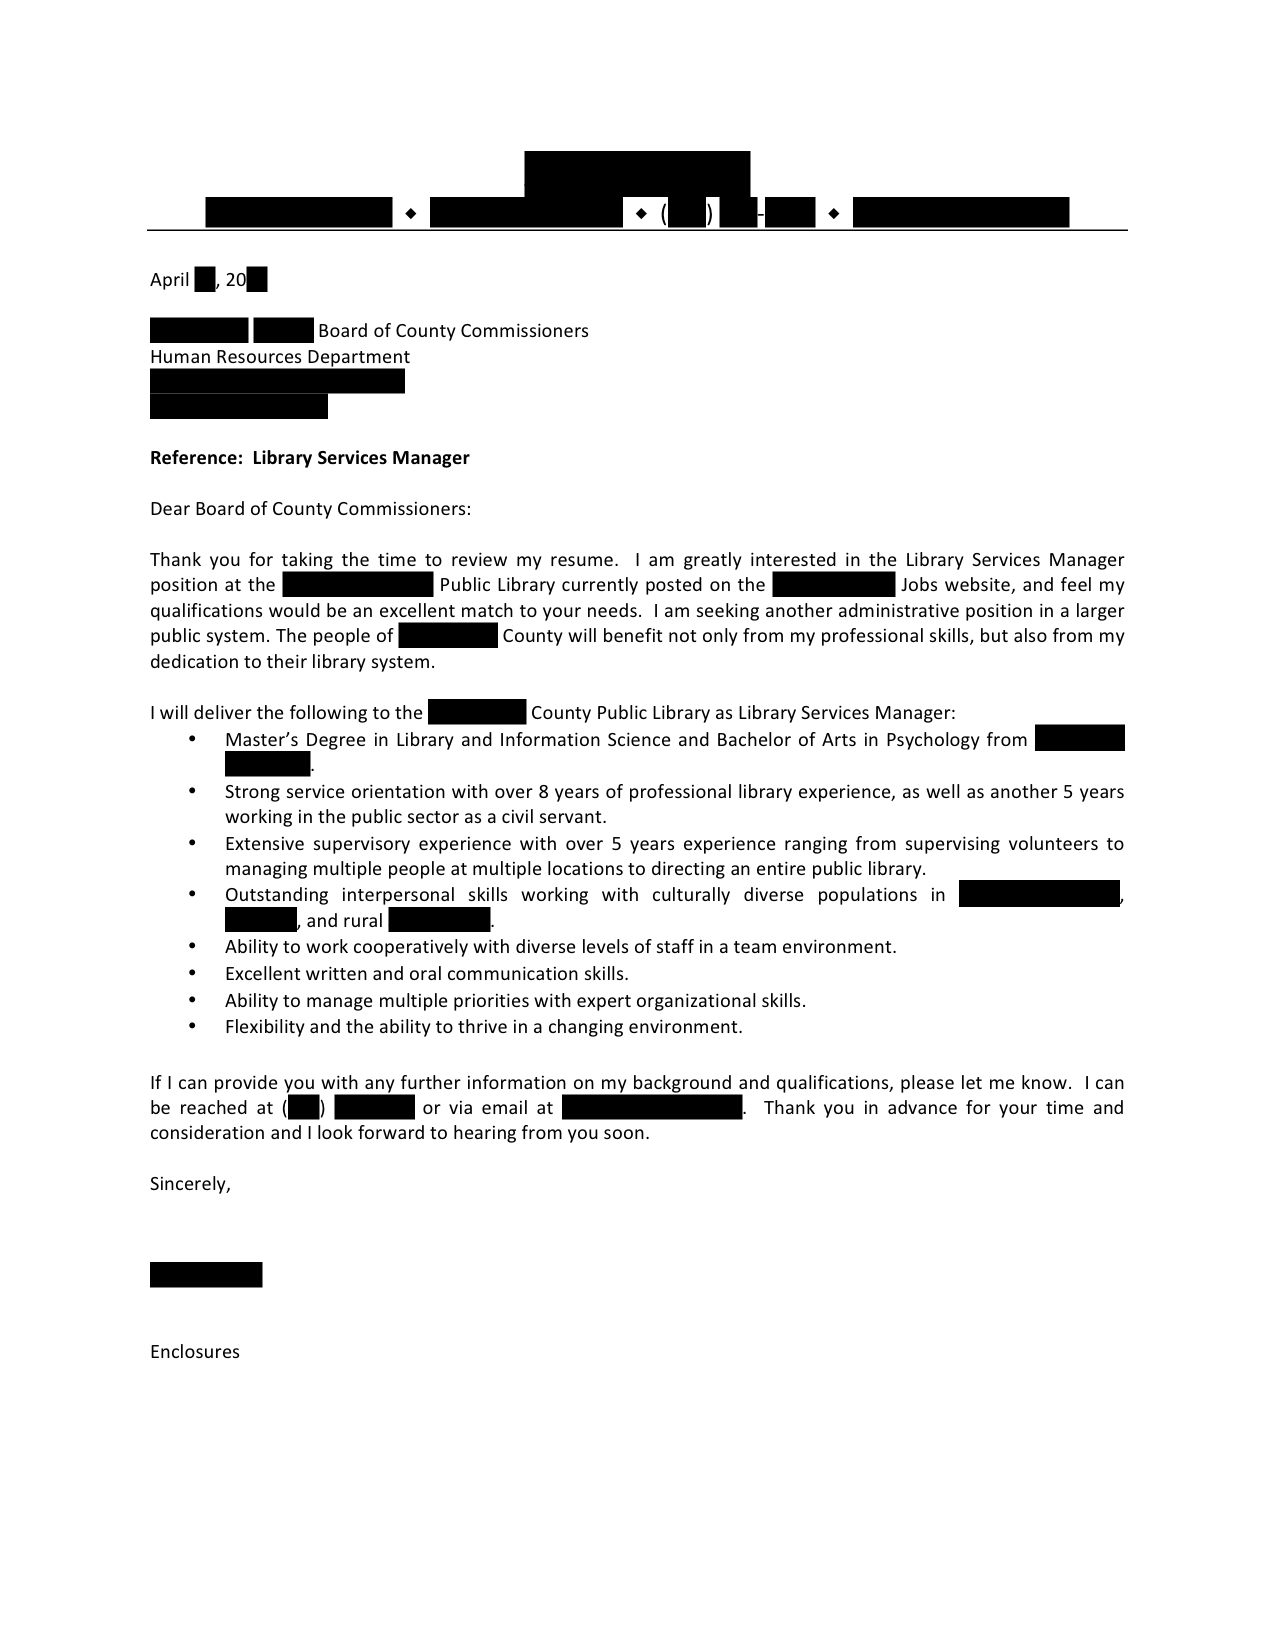 Customer service team manager cover letter